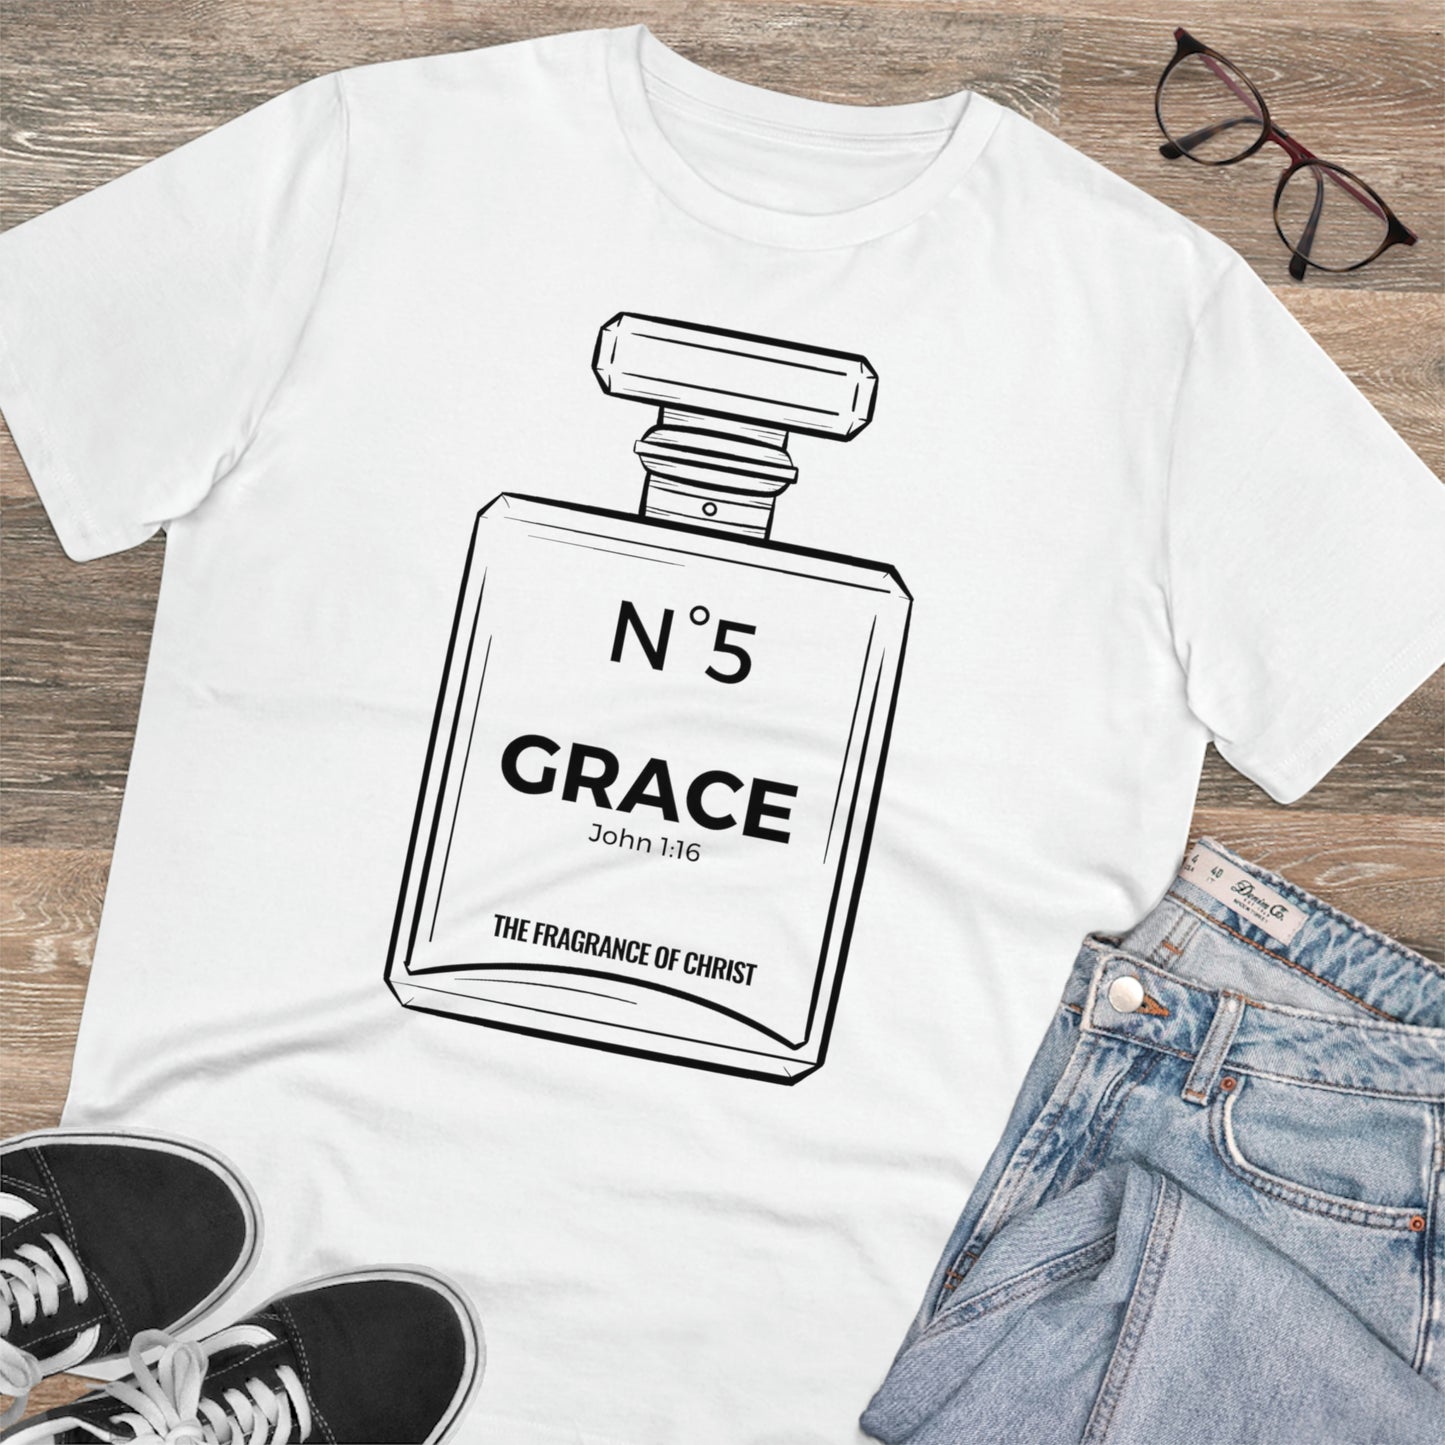 The smell of His Grace T-shirt